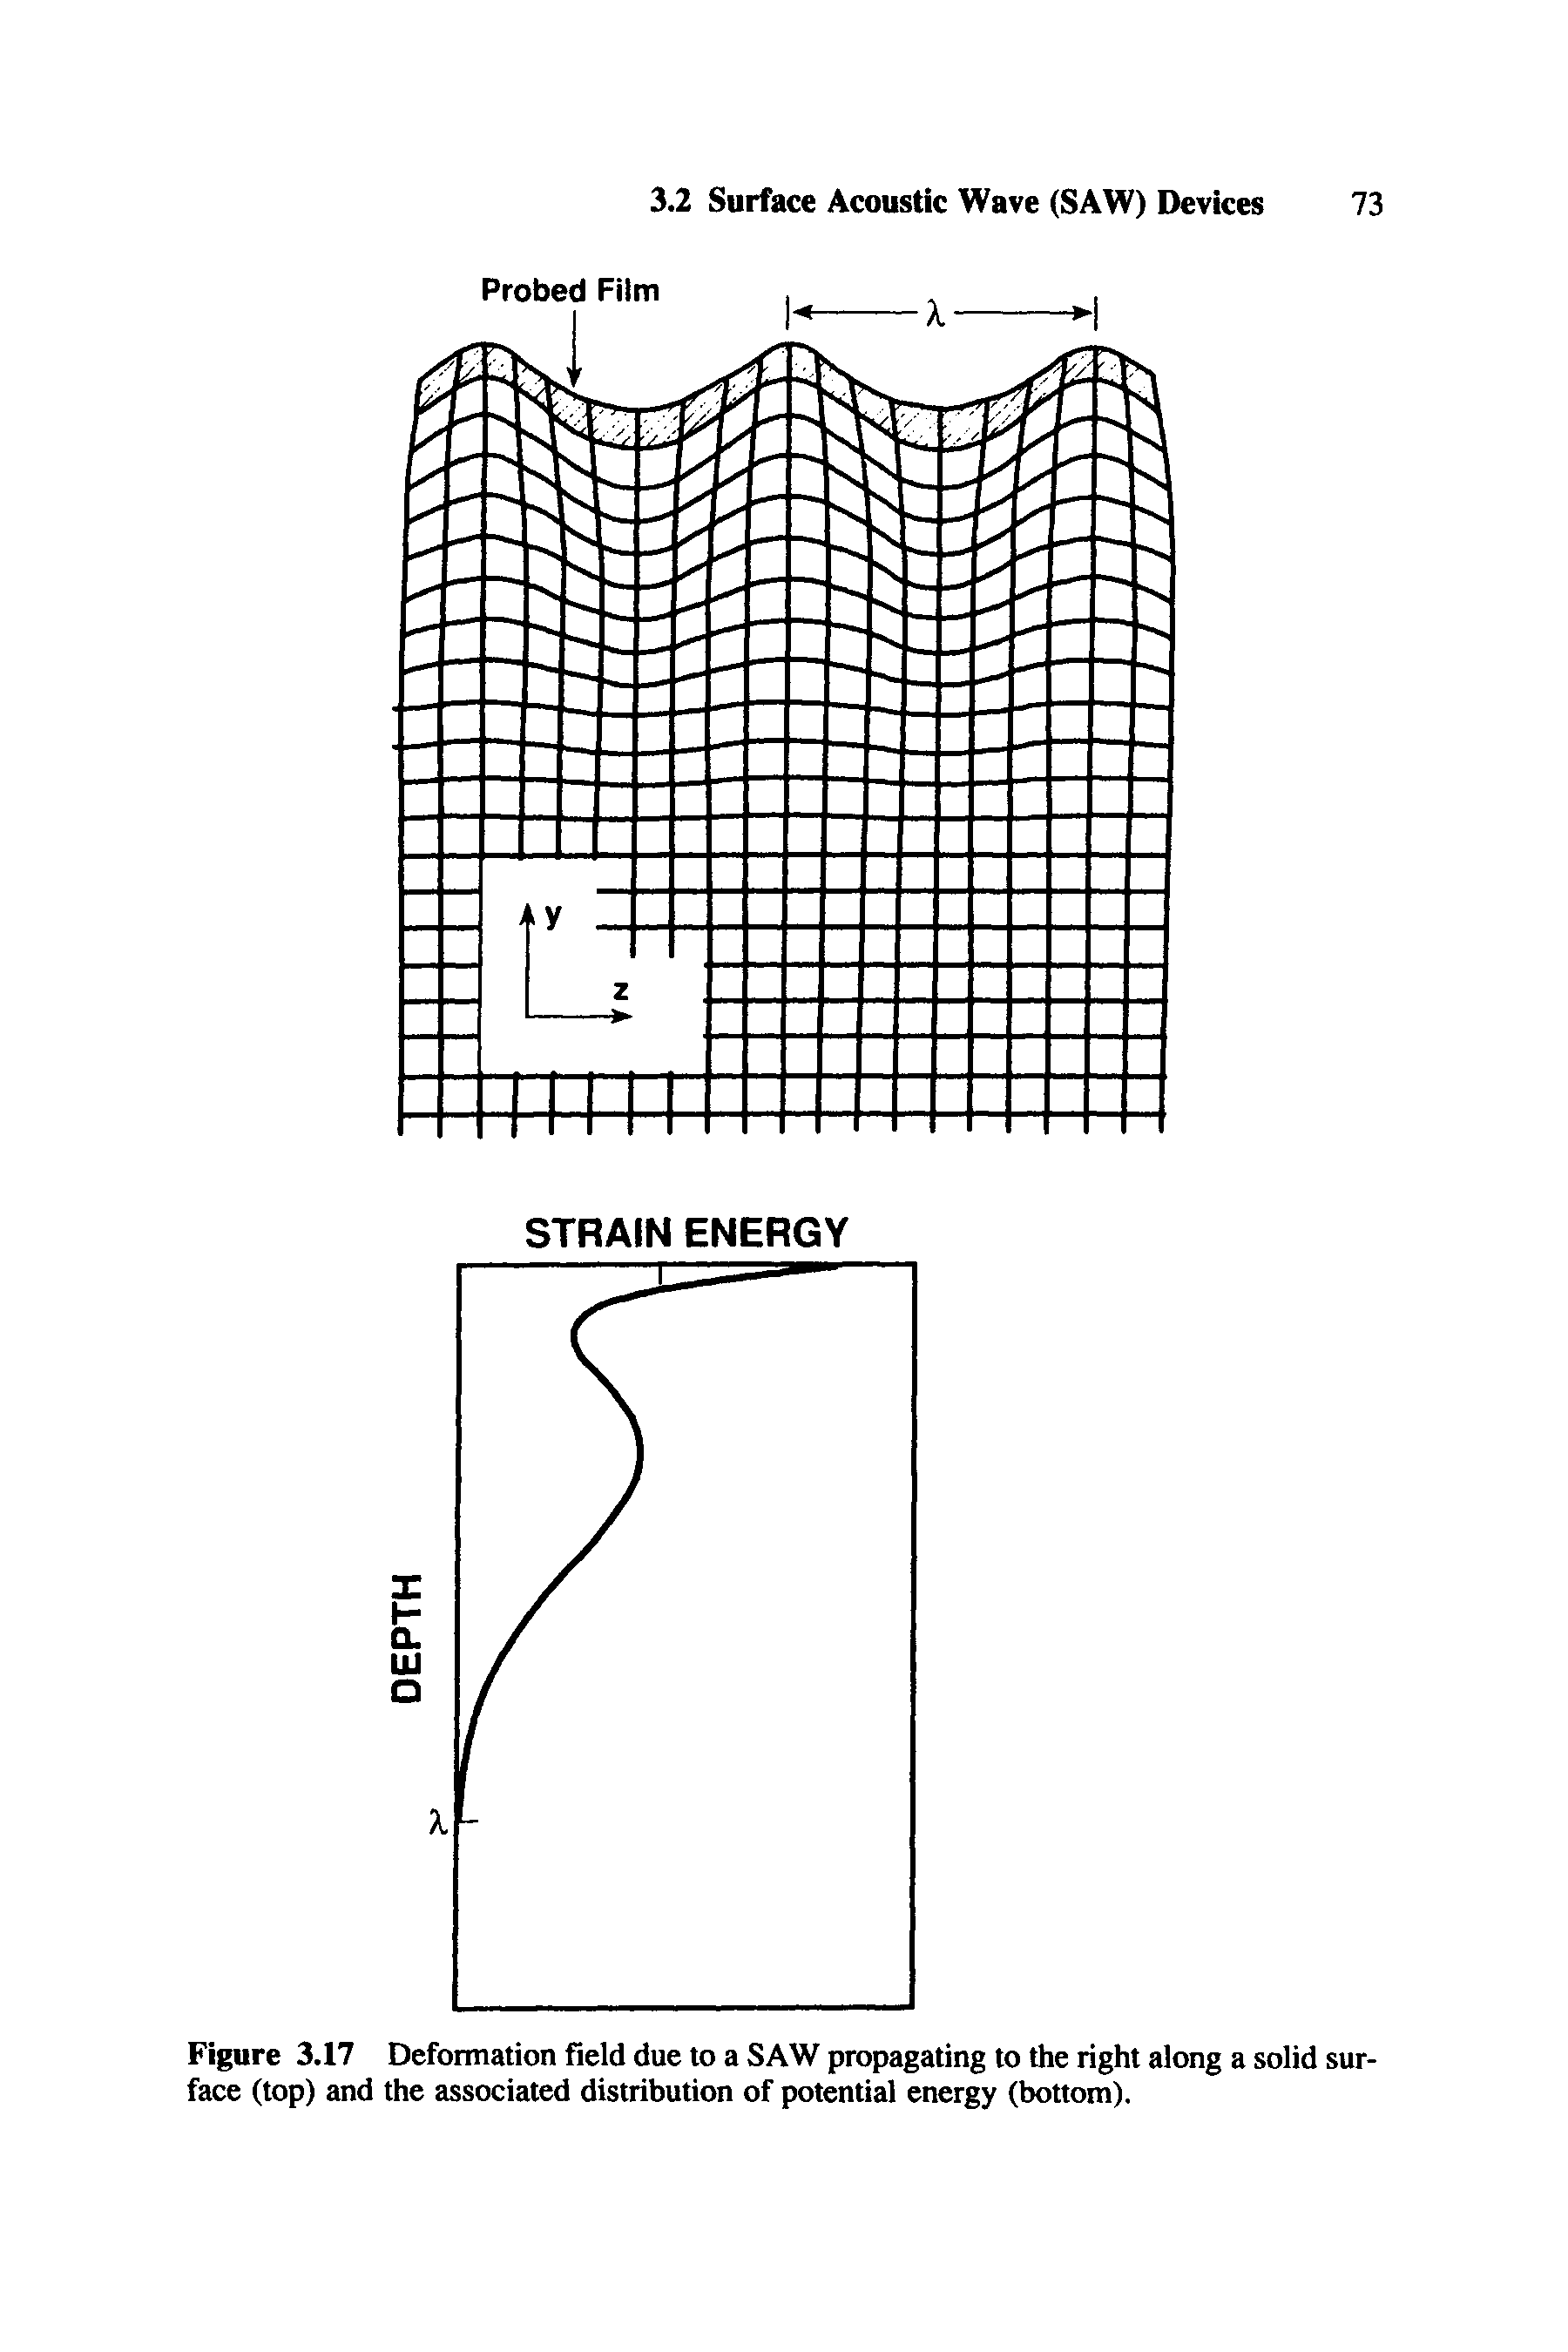 Figure 3.17 Deformation field due to a SAW propagating to the right along a solid surface (top) and the associated distribution of potential energy (bottom).